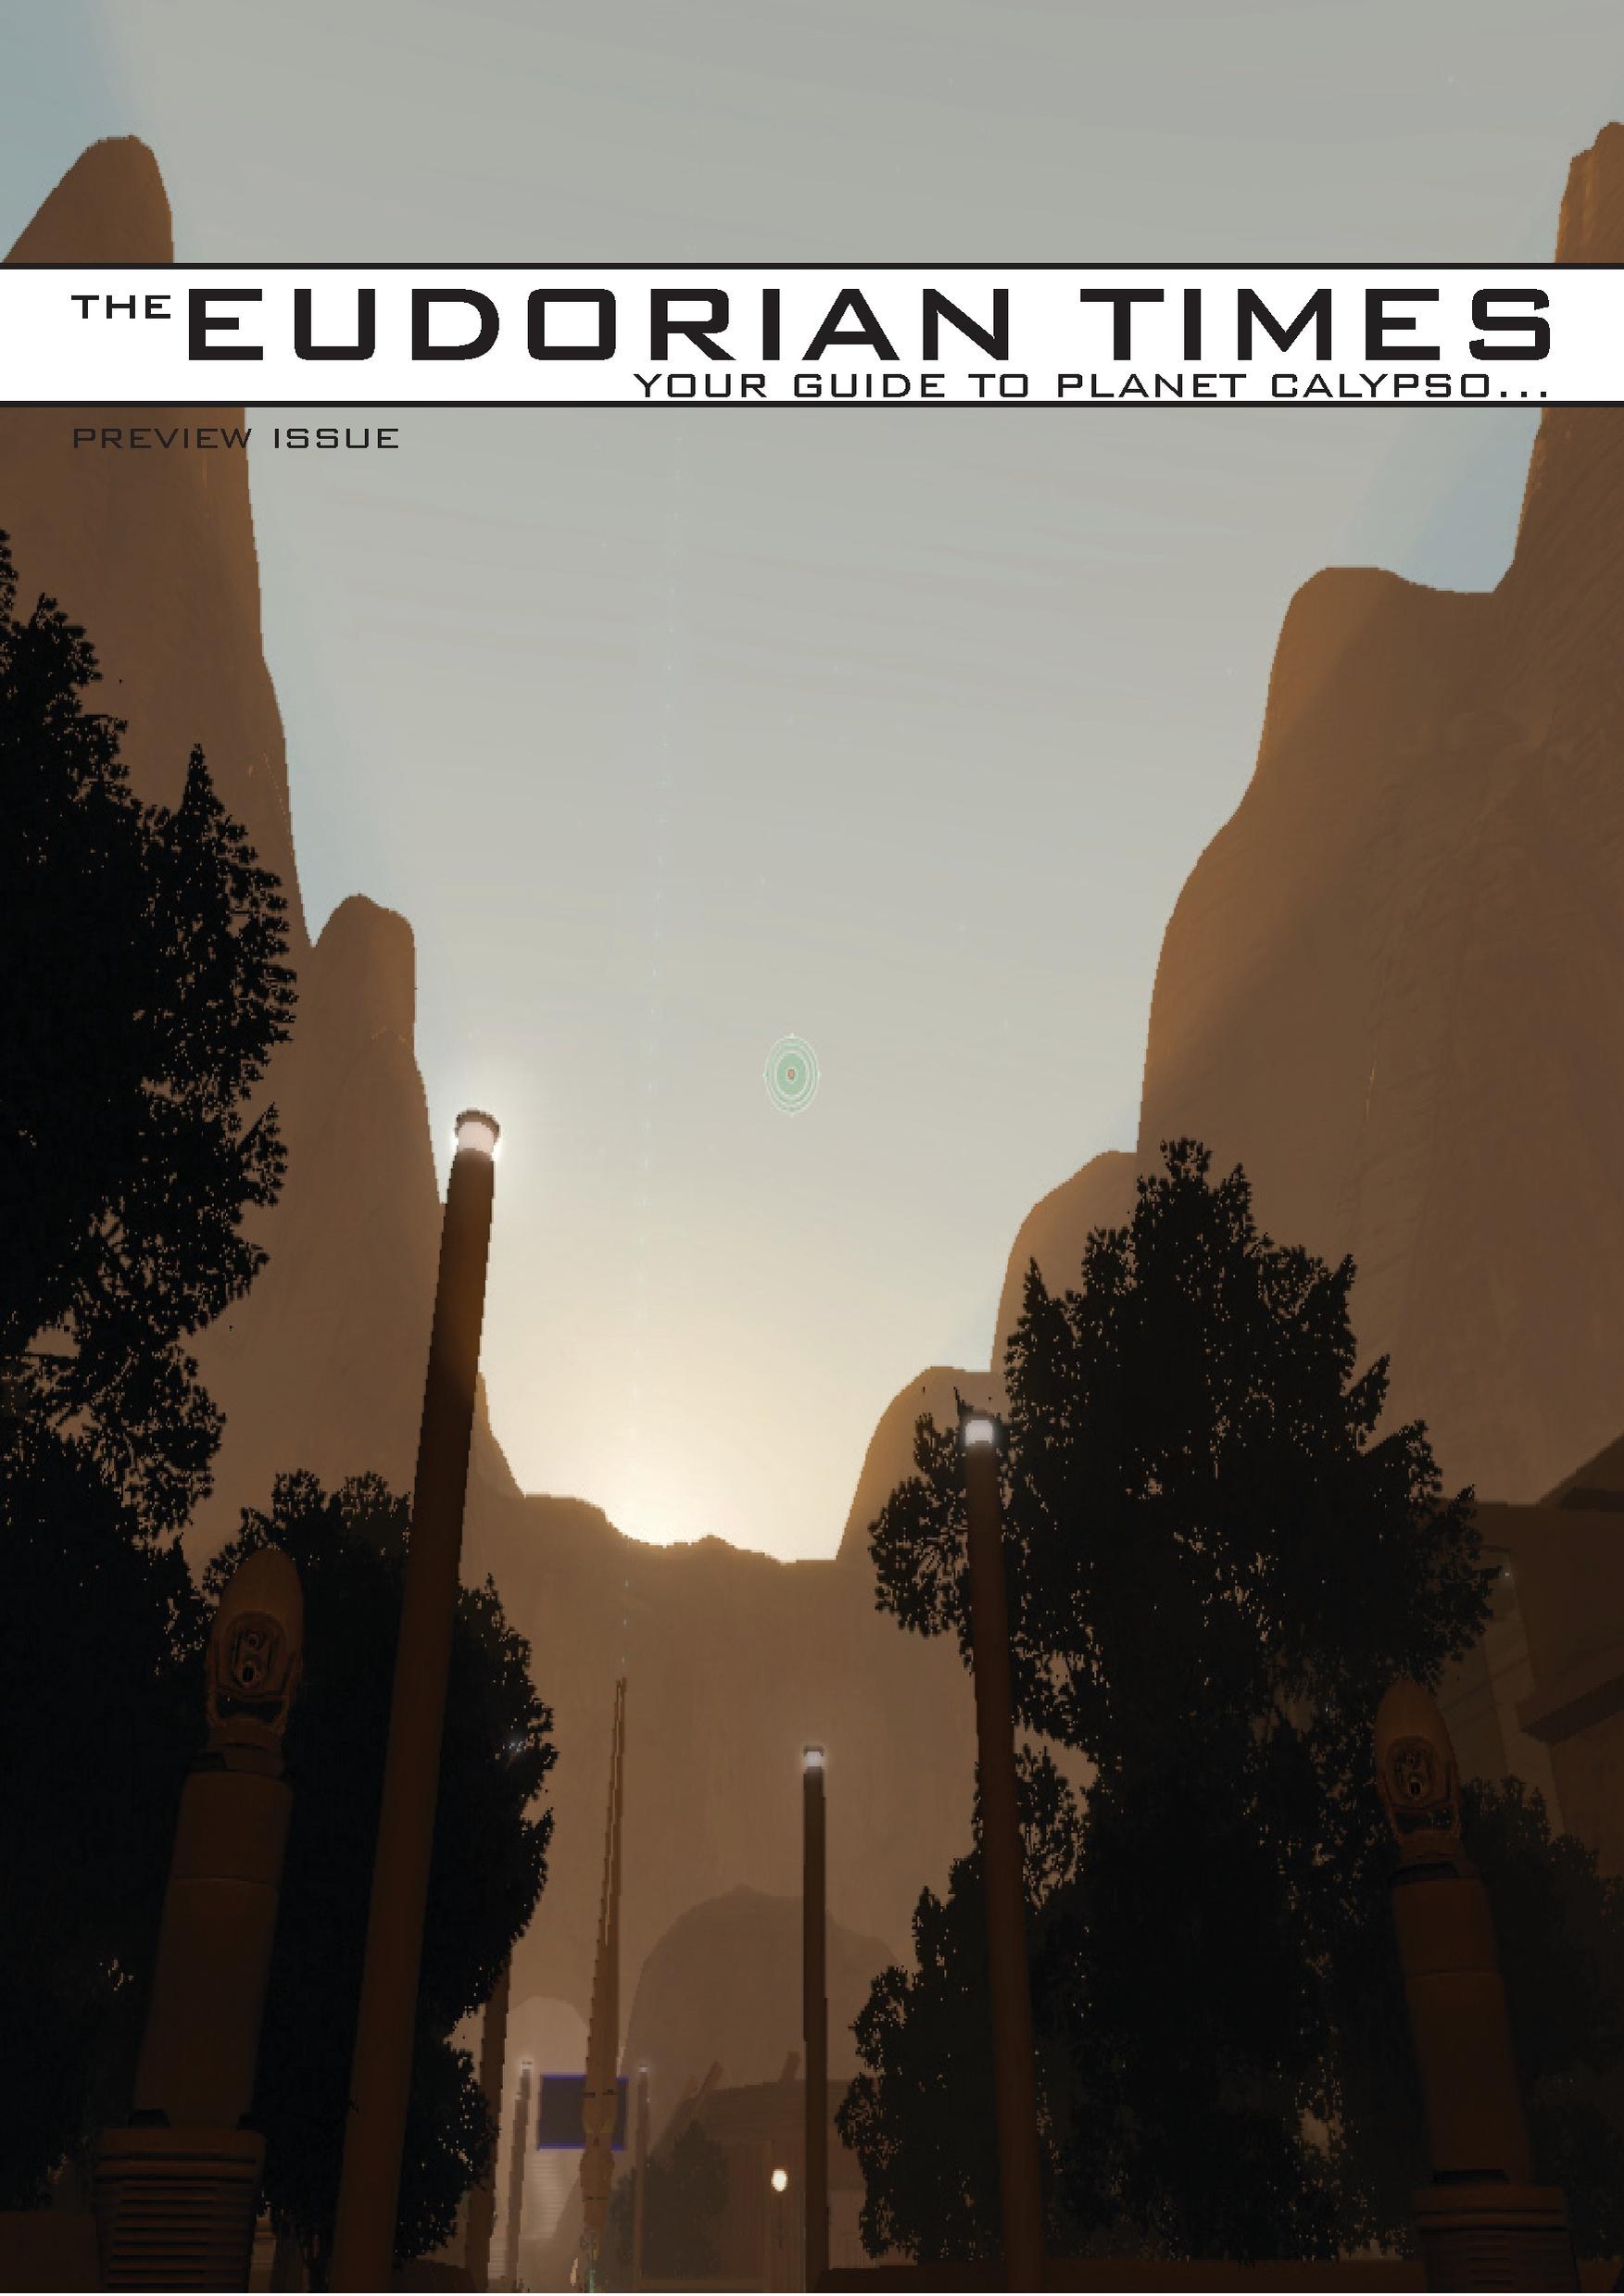 The Eudorian Times Preview Issue May 2010.pdf